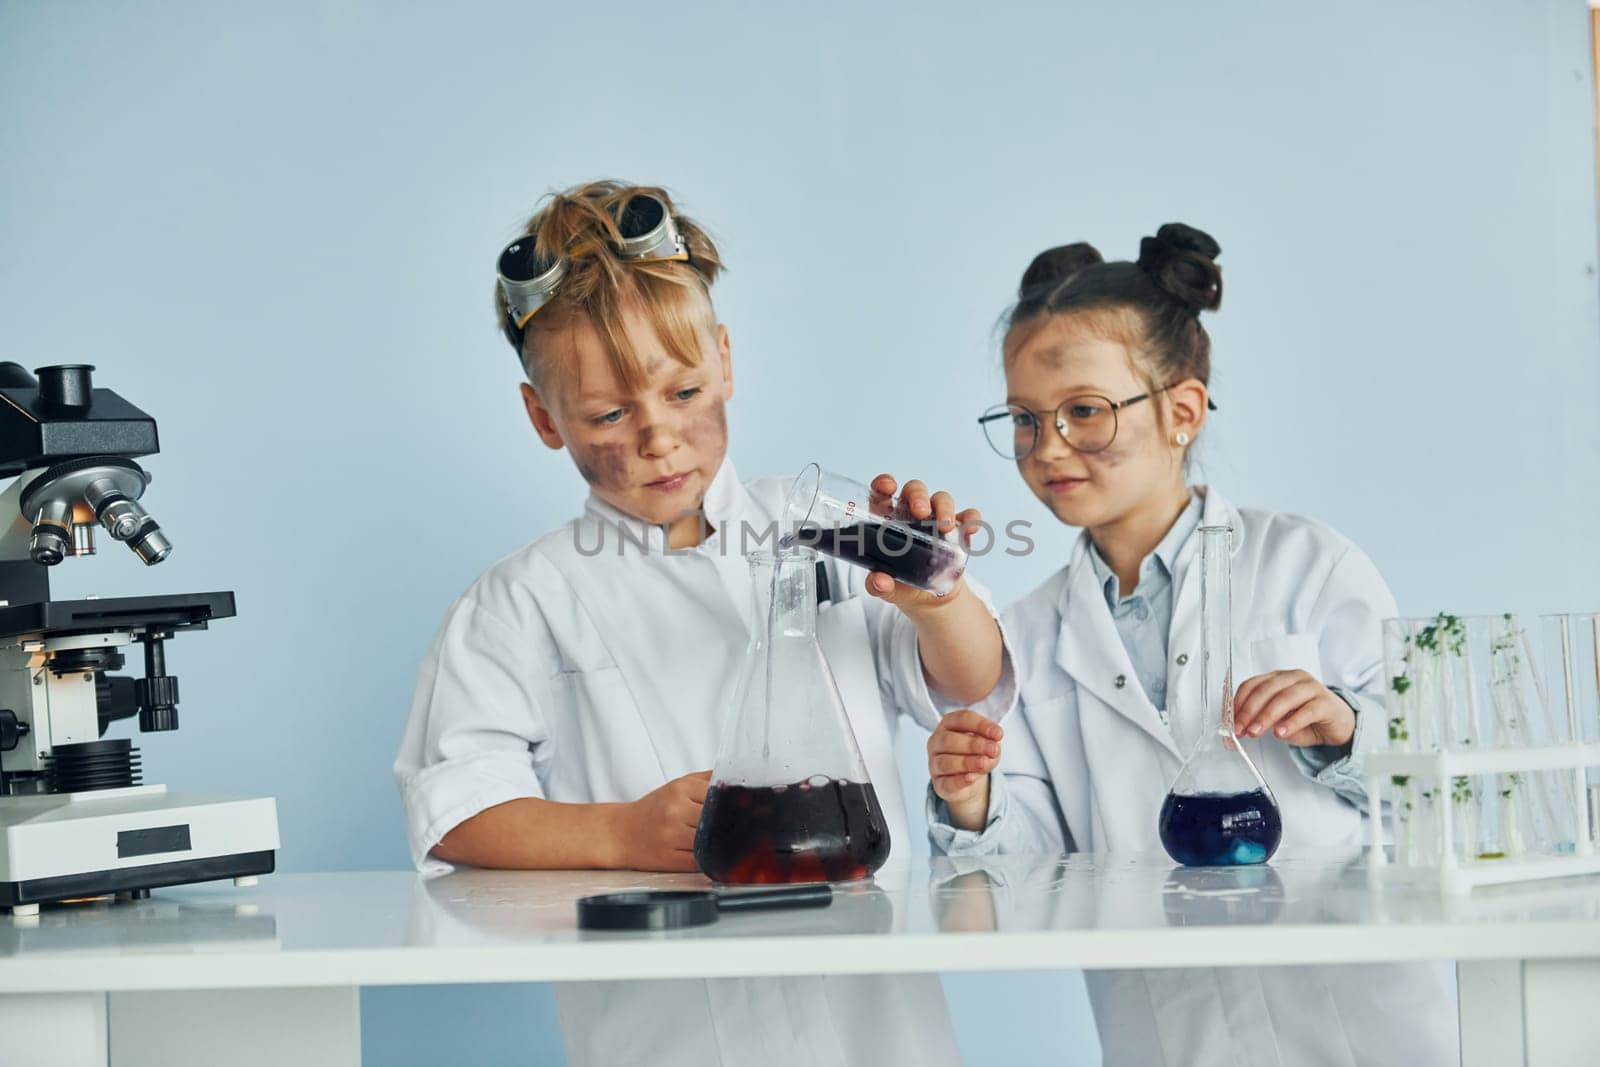 Little girl and boy in white coats plays a scientists in lab by using equipment by Standret